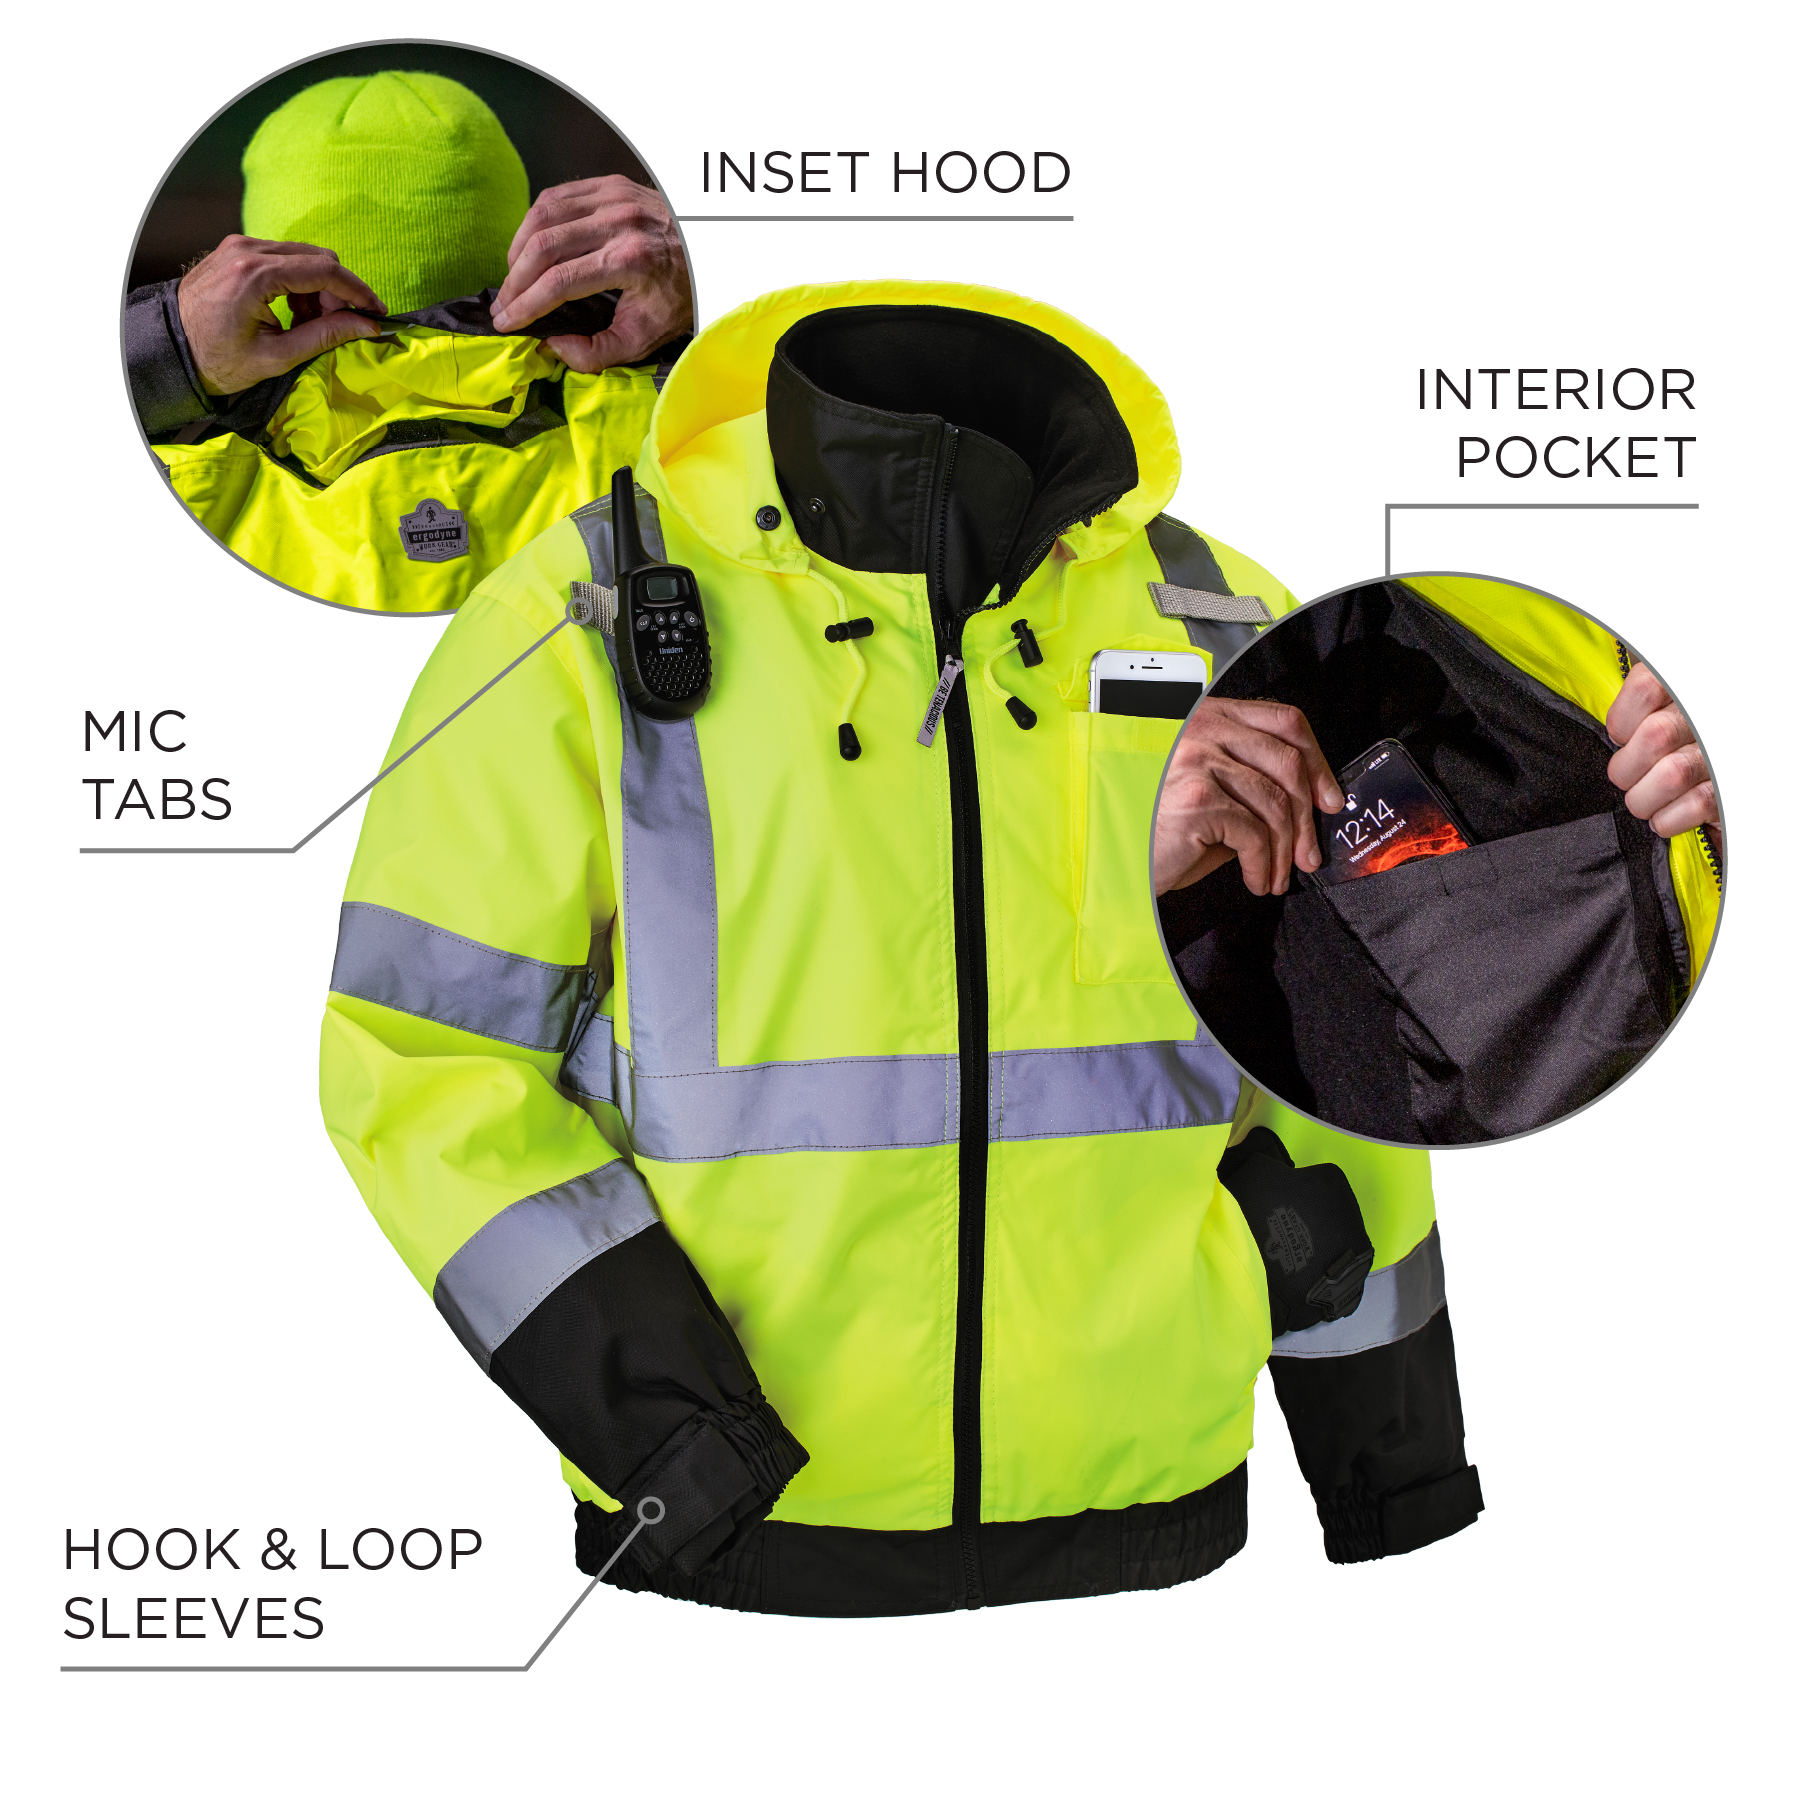 Hi-Vis Winter Jacket and Vest with Detachable Sleeves